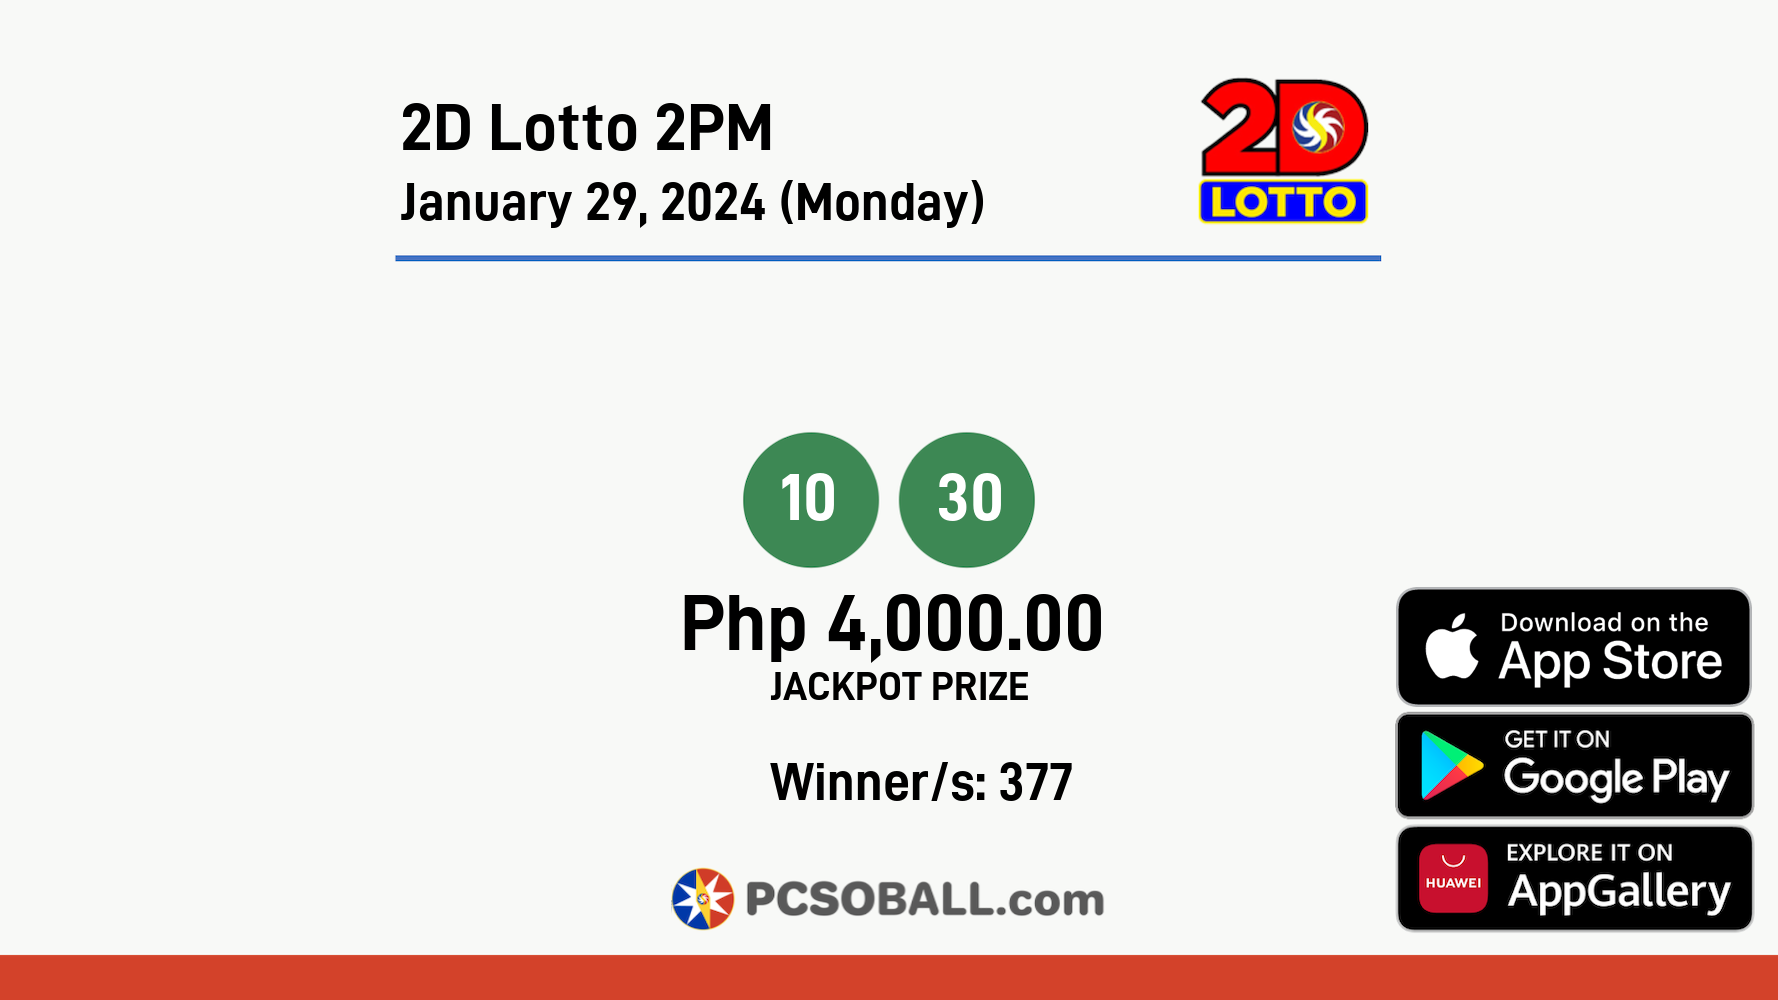 2D Lotto 2PM January 29, 2024 (Monday) Result